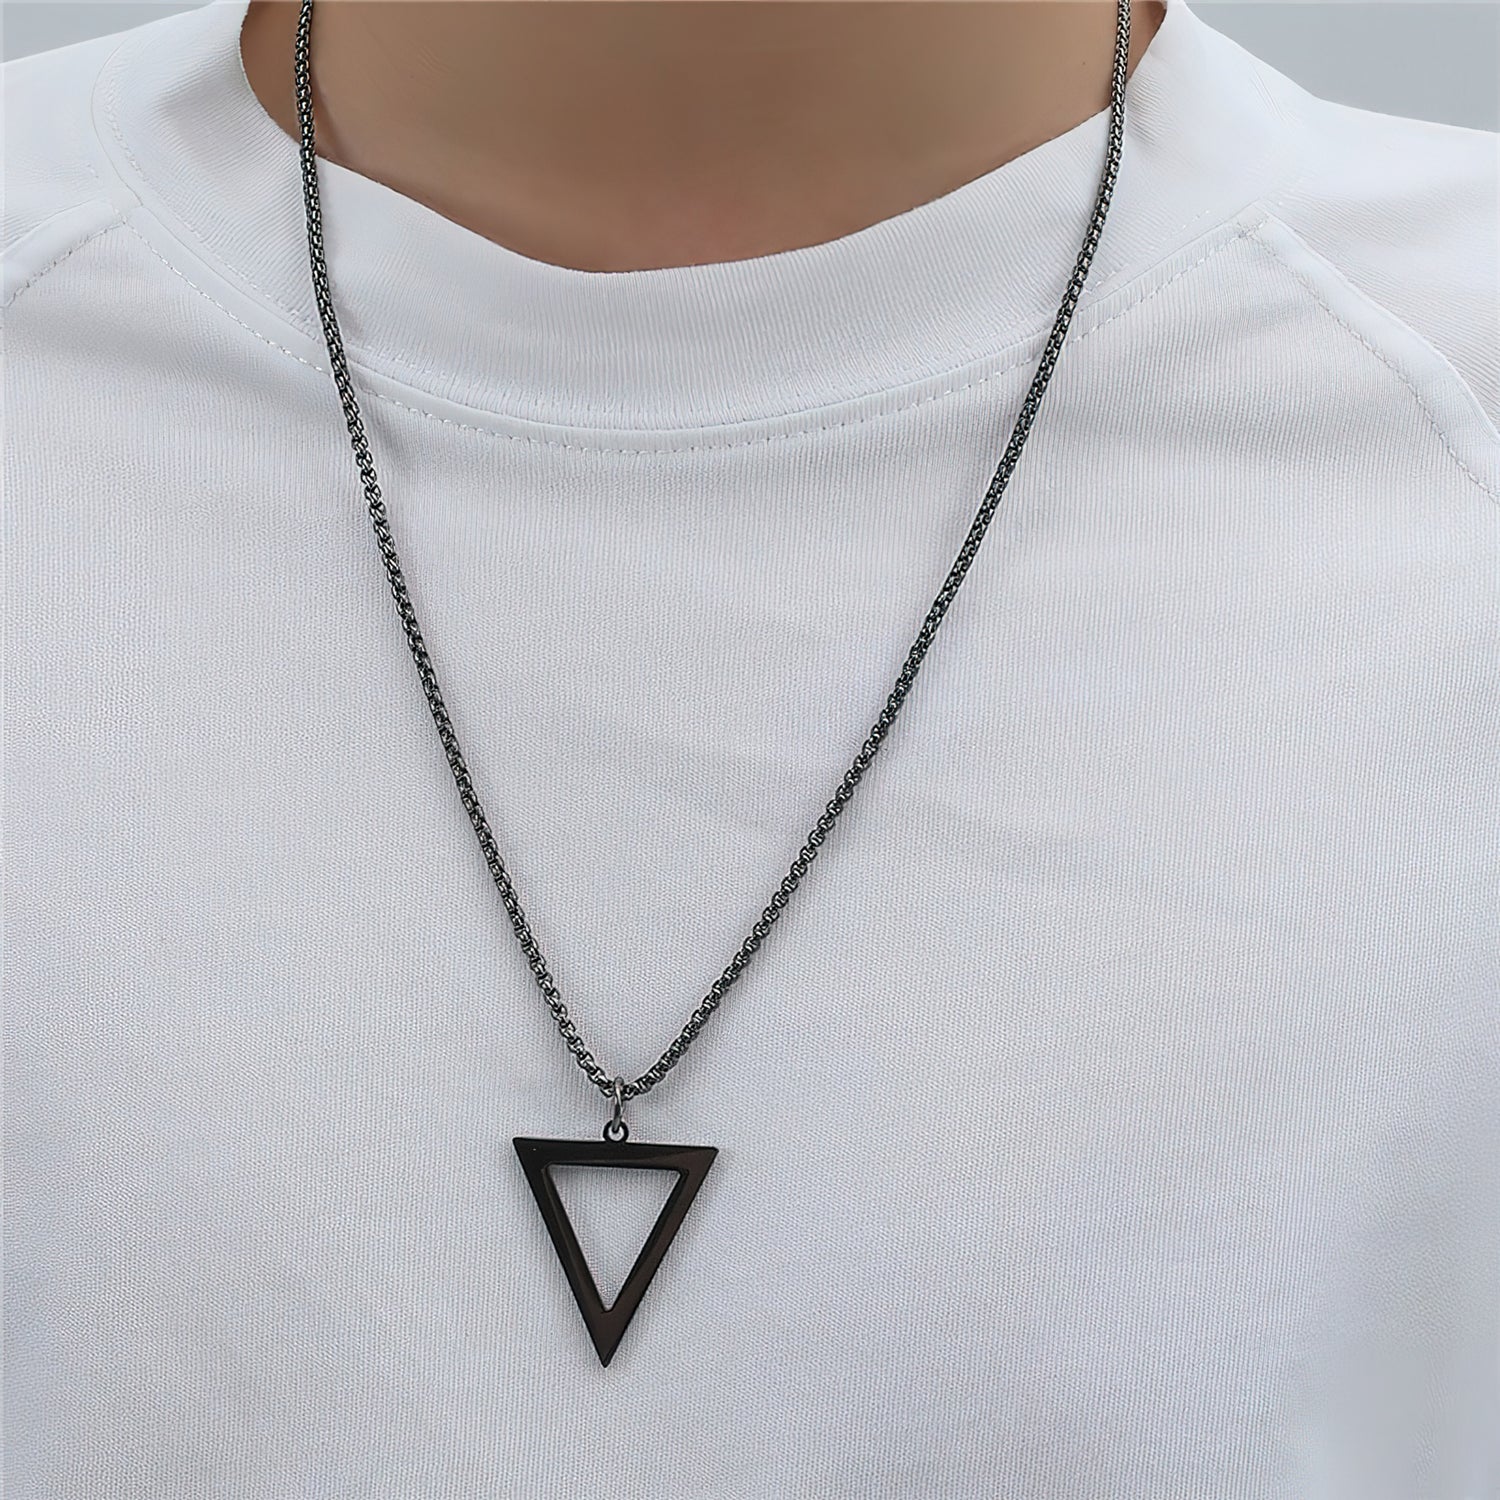 Necklace for Men Stainless Steel Necklace for Women Triangle Necklace  Arrowhead Pendant Necklace Charm Pendant with Chain Link Classic Fashion  Jewelry for Boys Teens and Girls Unisex : Amazon.in: Fashion